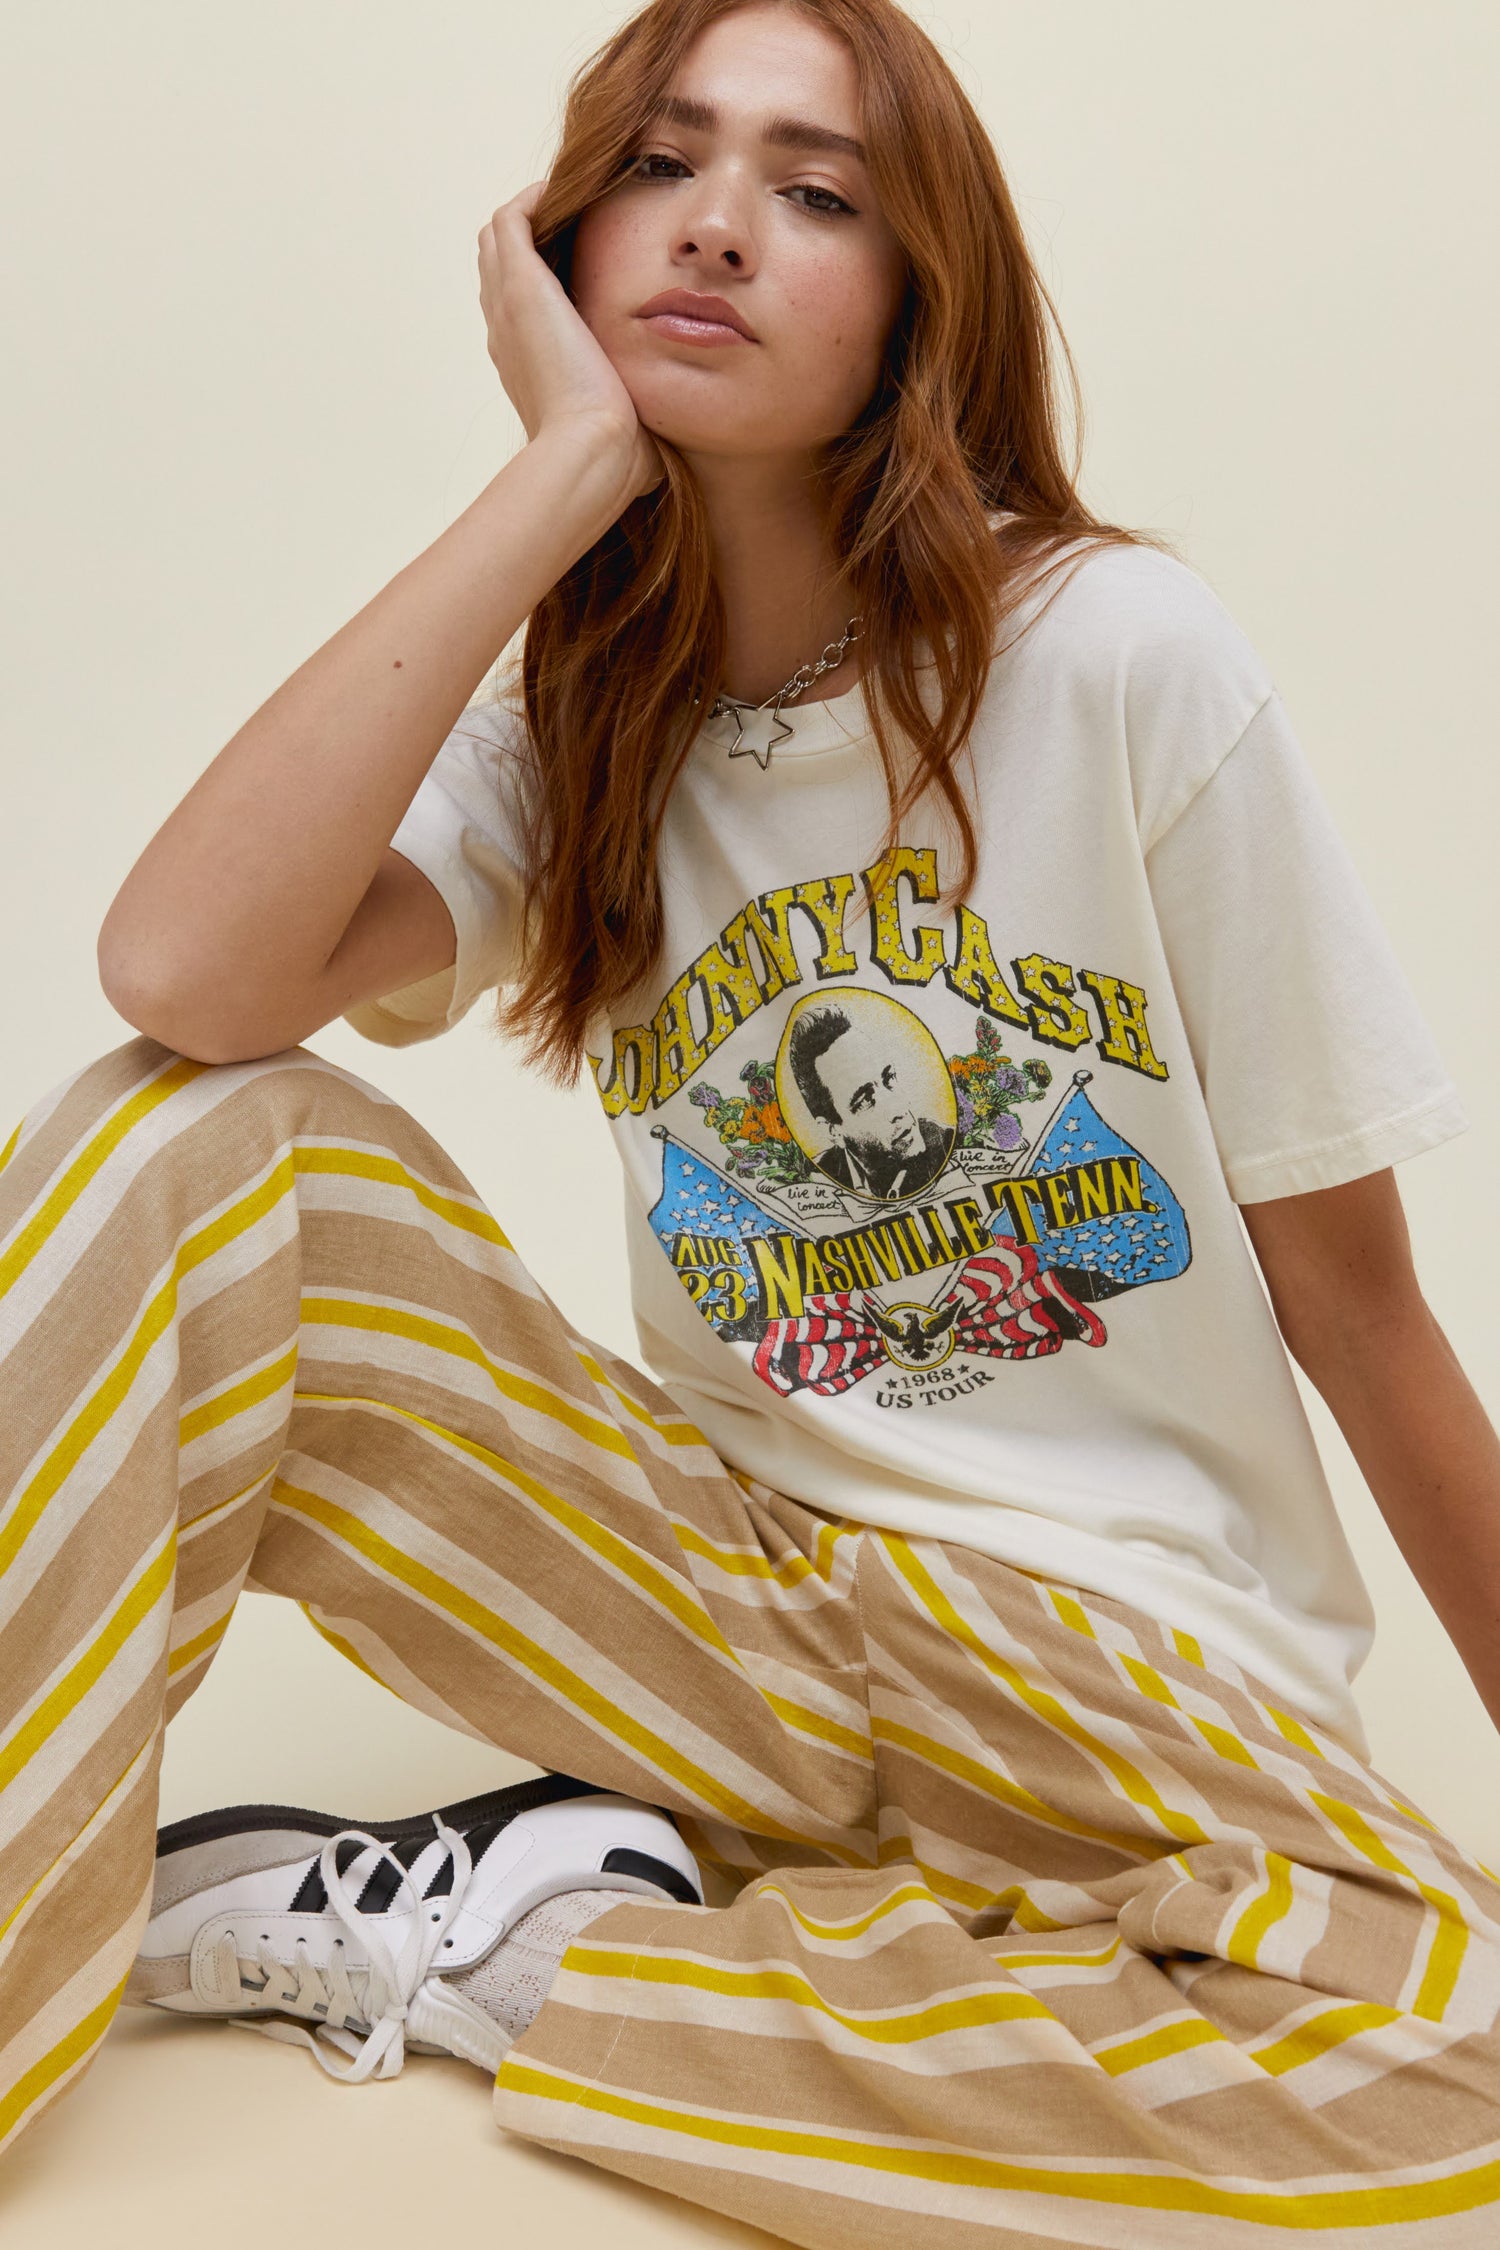 A model featuring a white tee stamped with "Johnny Cash" graphic in the center